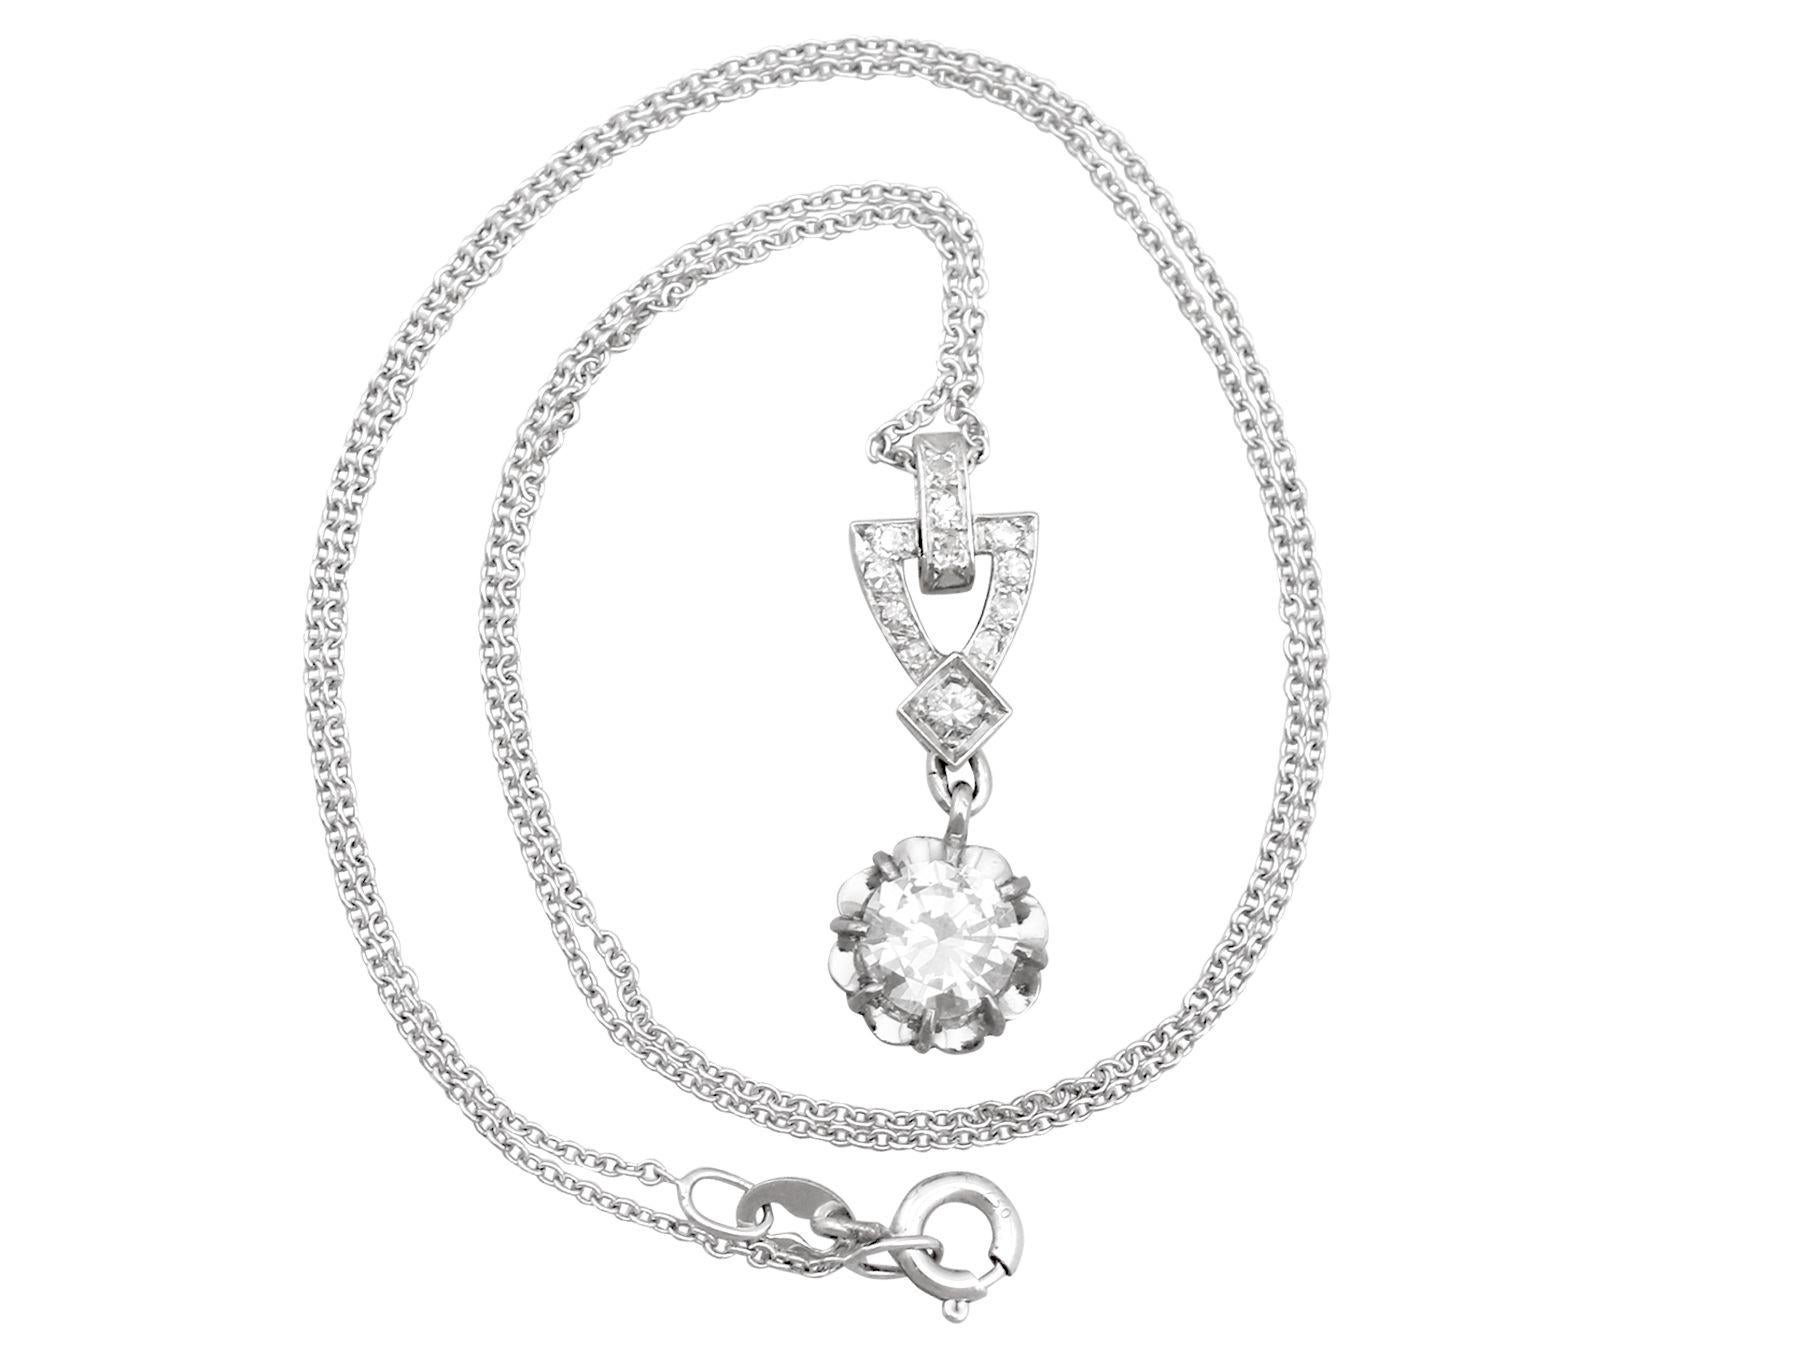 A stunning antique French 0.96 carat diamond and platinum pendant with an 18 karat white gold chain; part of our diverse antique jewelry collections.

This stunning, fine and impressive antique diamond drop pendant has been crafted in platinum, with